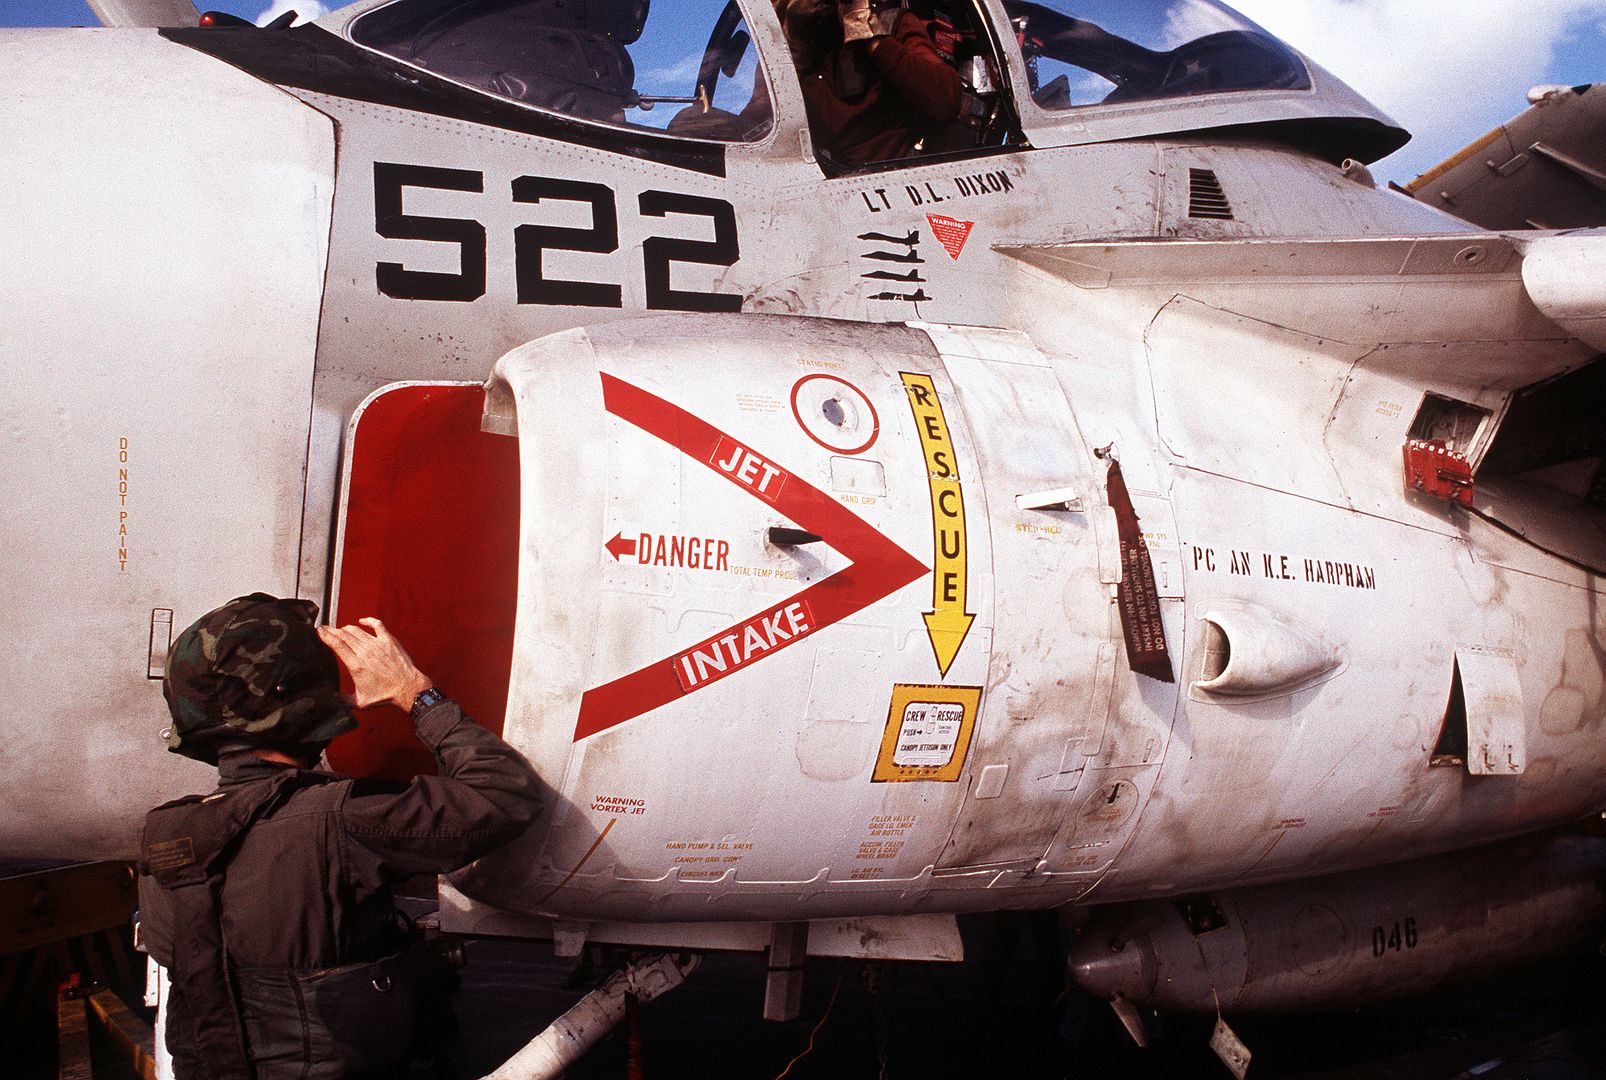 The Pilot Of An Attack Squadron 35 A 6E Intruder Aircraft Performs A Preflight Check On His Plane Prior To Taking Off From The Flight Deck Of The Aircraft Carrier USS SARATOGA During Operation Desert Storm